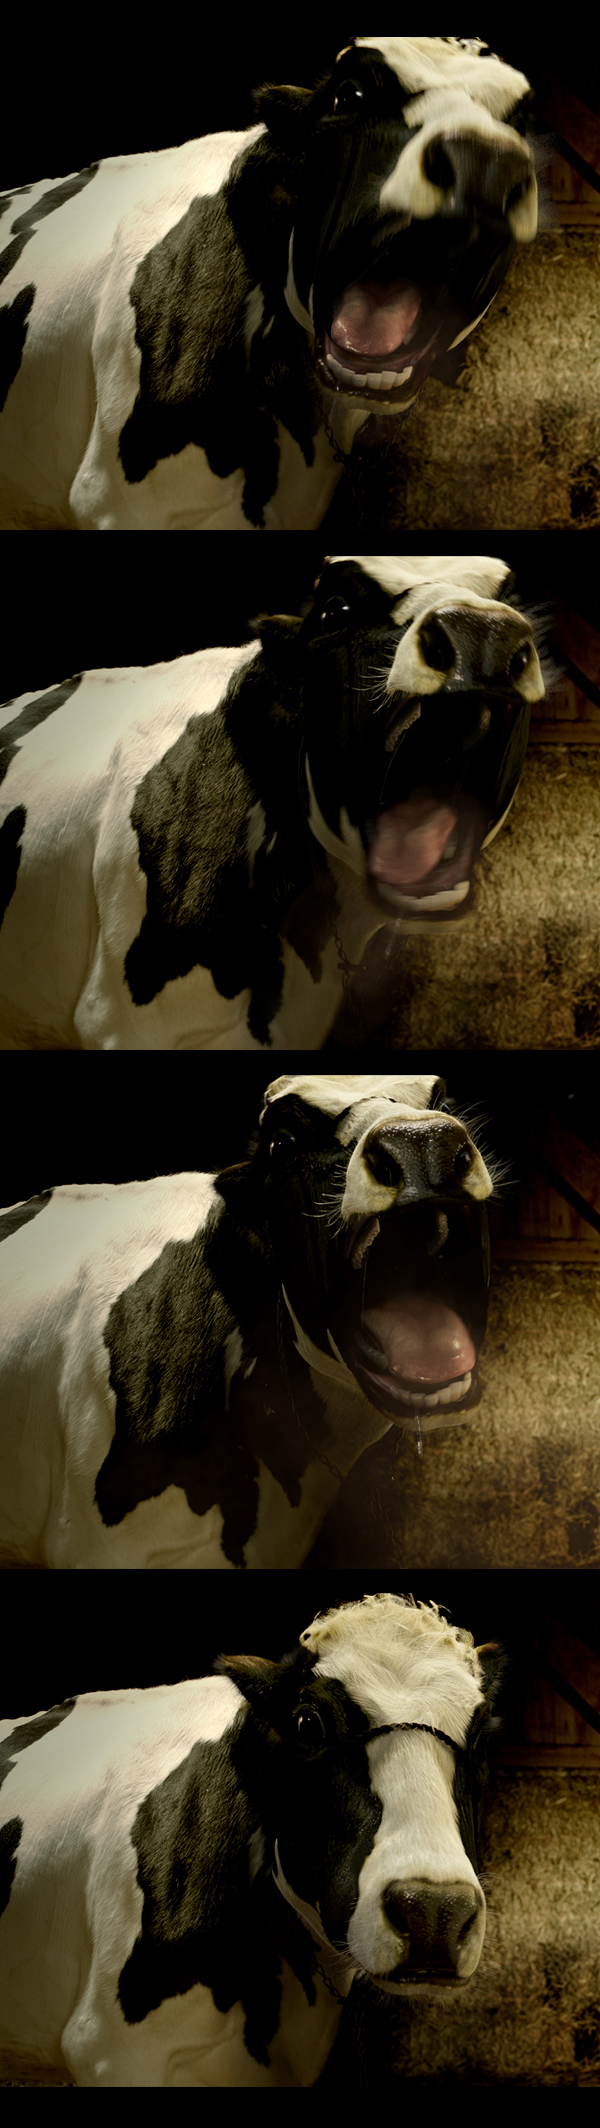 CGI softimage nuke shading Render cow making of compositing 3D